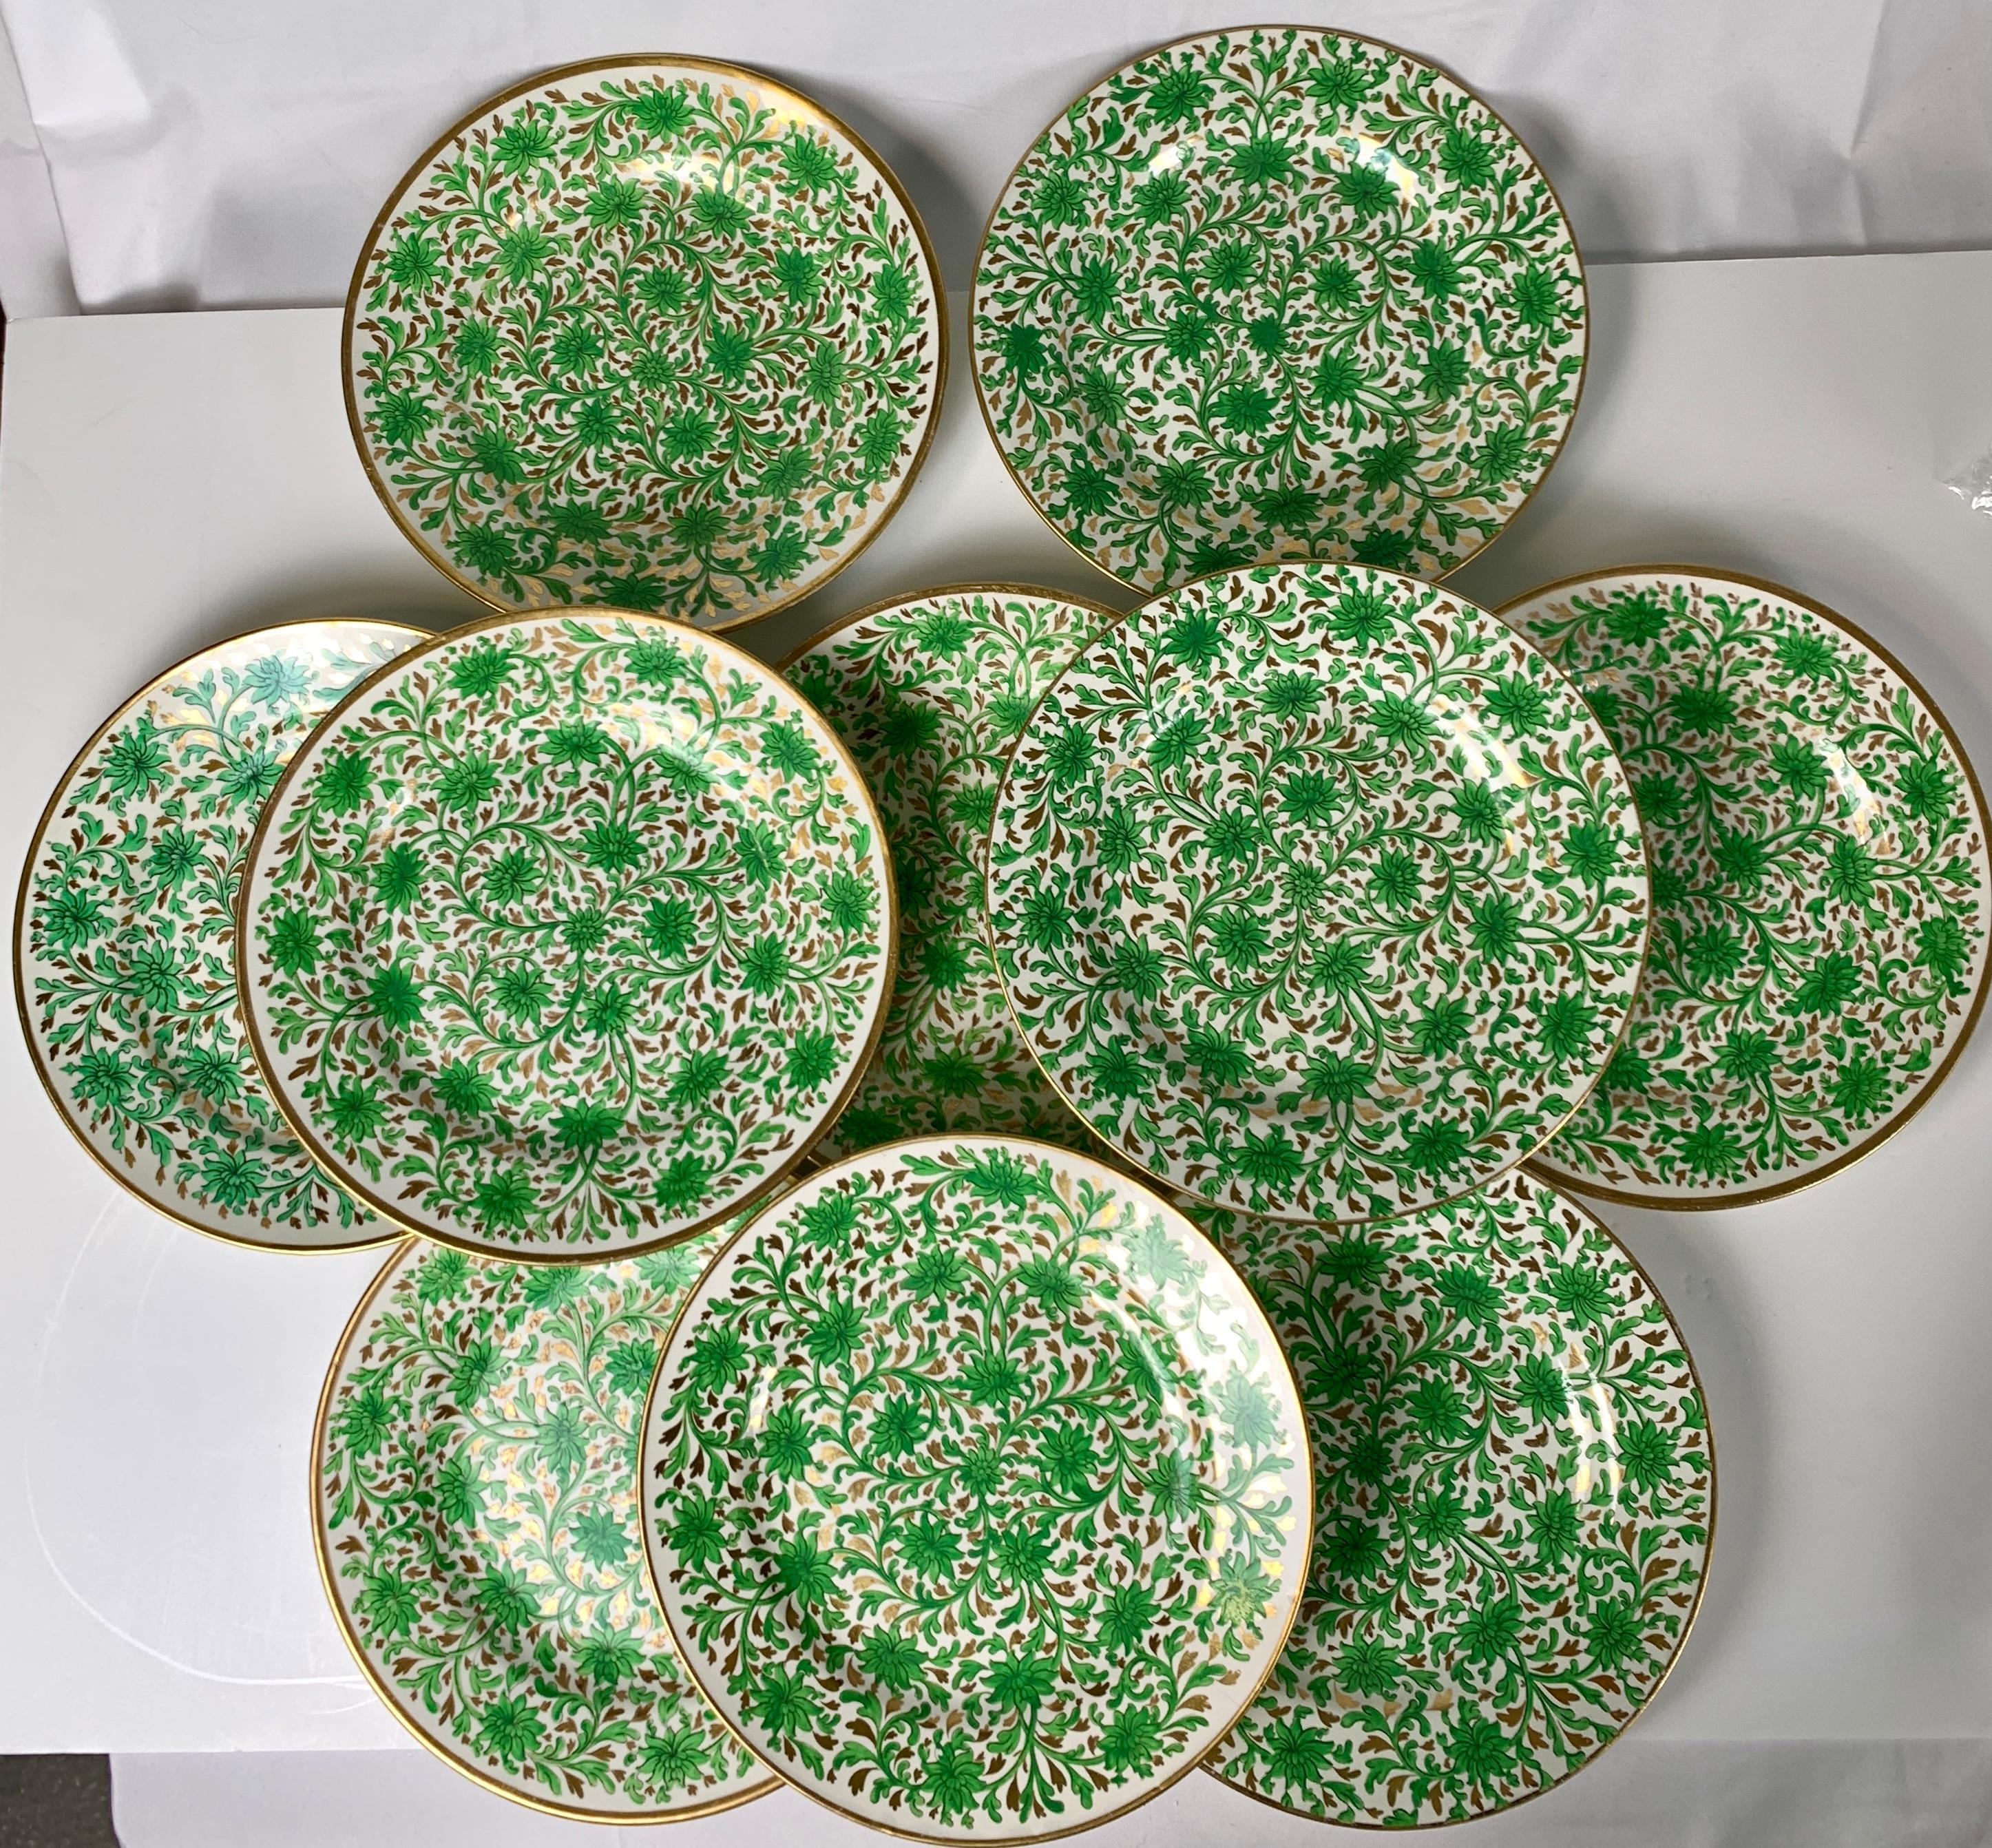 WHY WE LOVE IT: A Great Pattern! And a Great Color Combination of Green and Gold!
We are pleased to offer this fabulous set of 10 